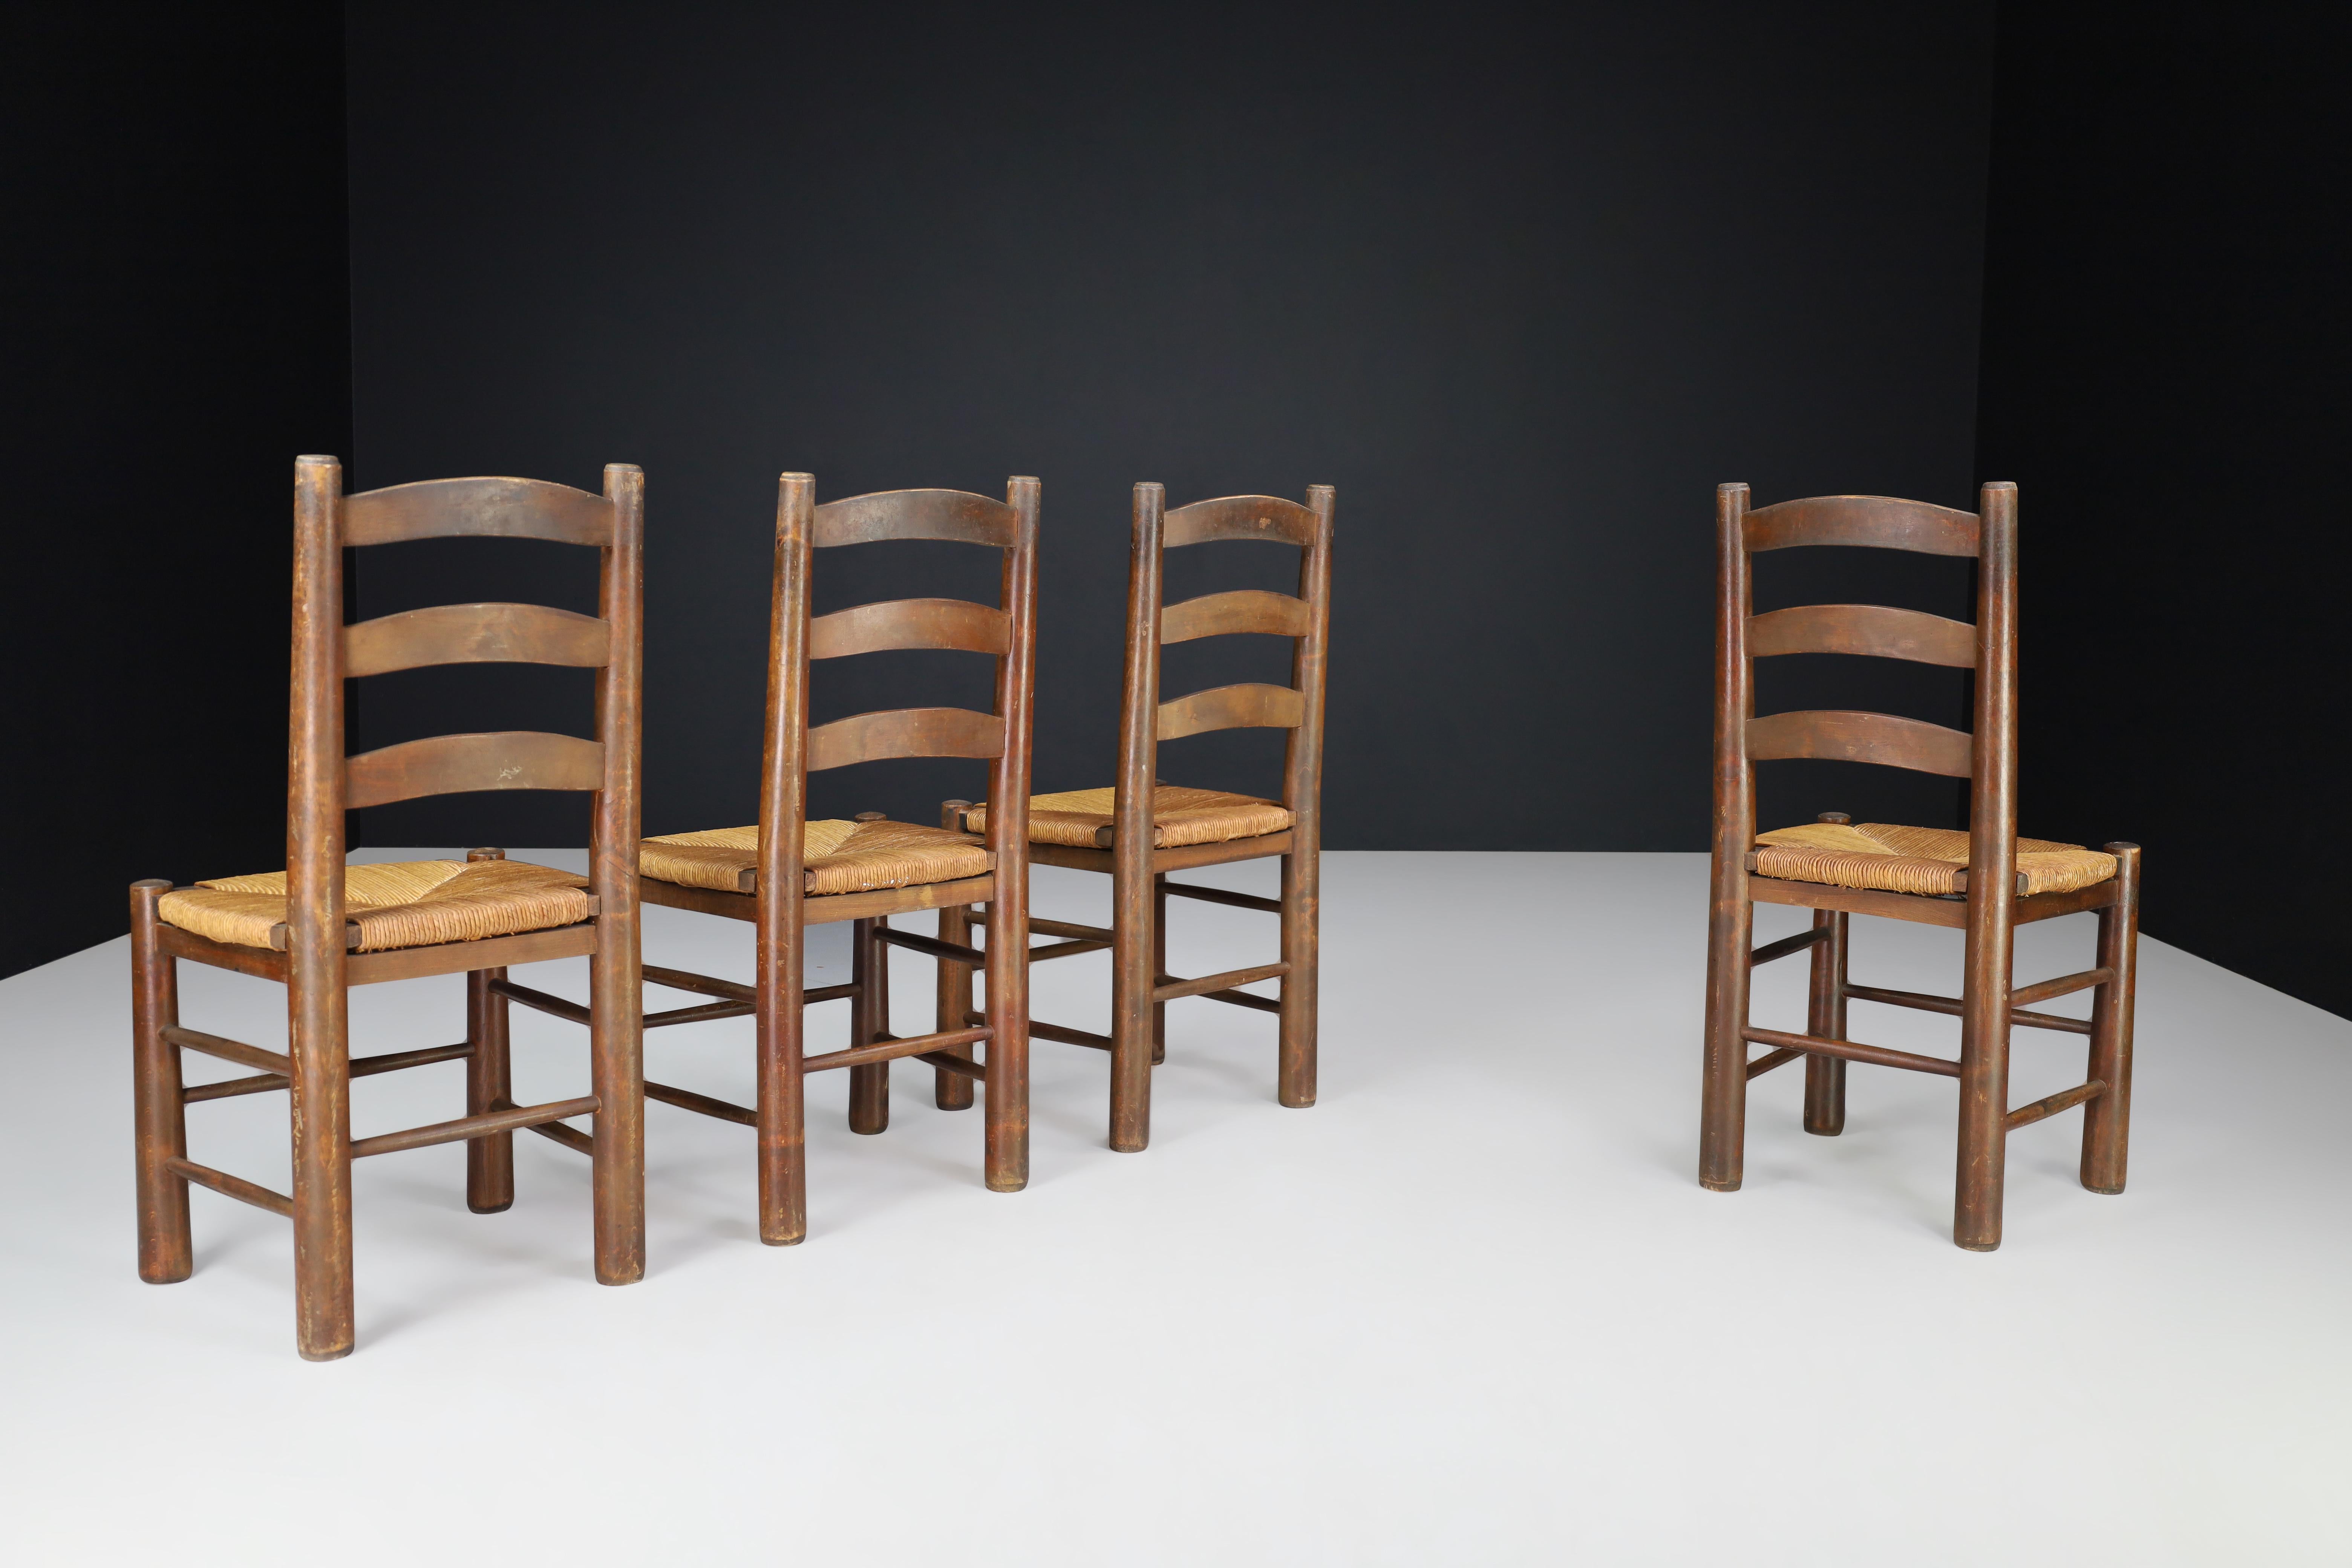 Brutalist Georges Robert Dining Chairs in Oak and Rush, France, 1950s For Sale